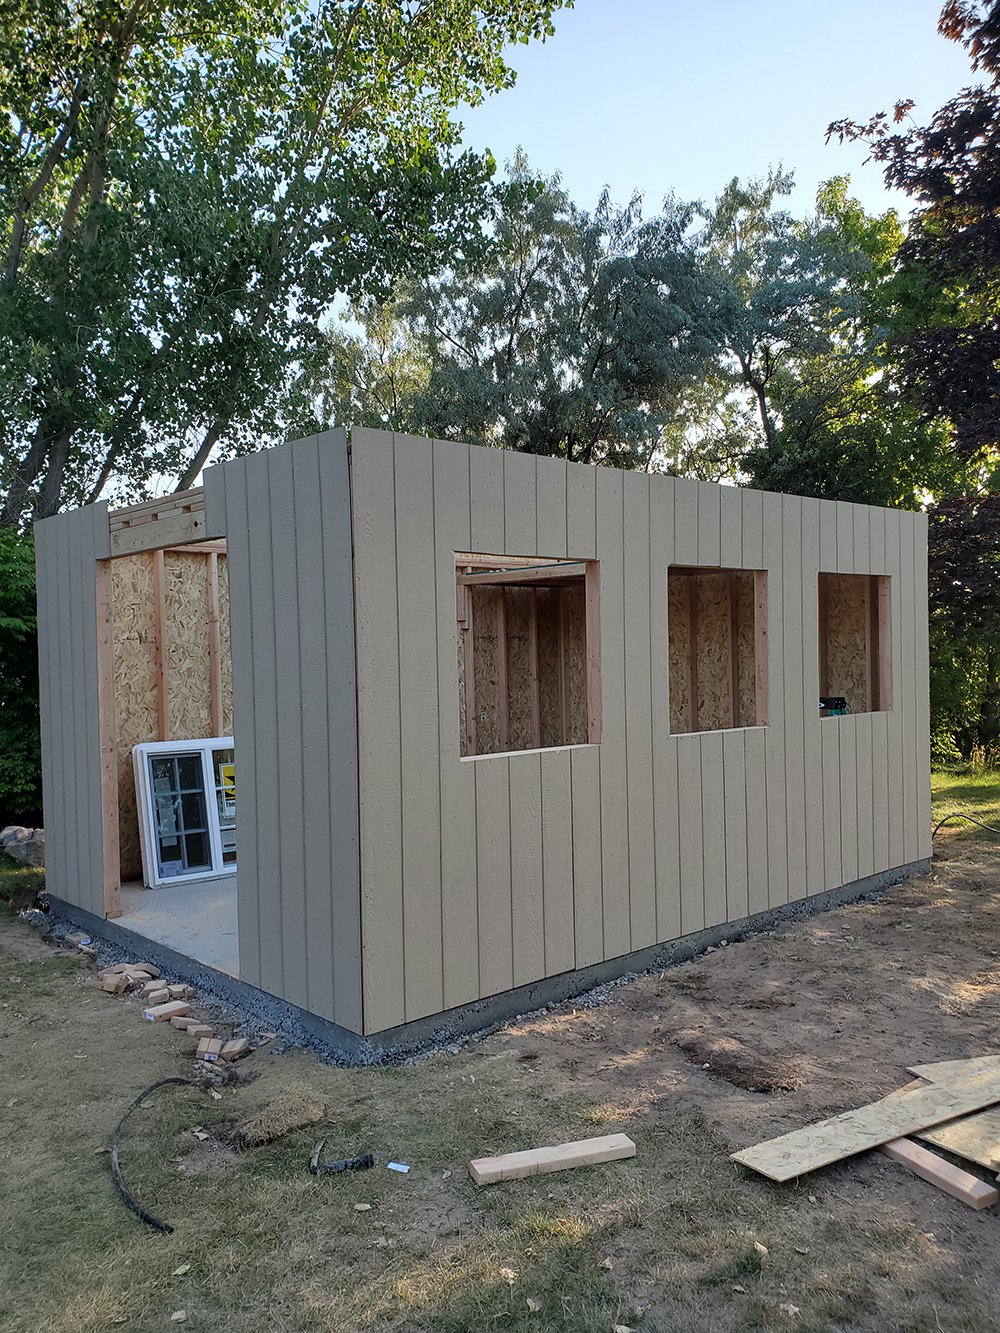 Our Shed Build, Supply List, and Budget - roomfortuesday.com